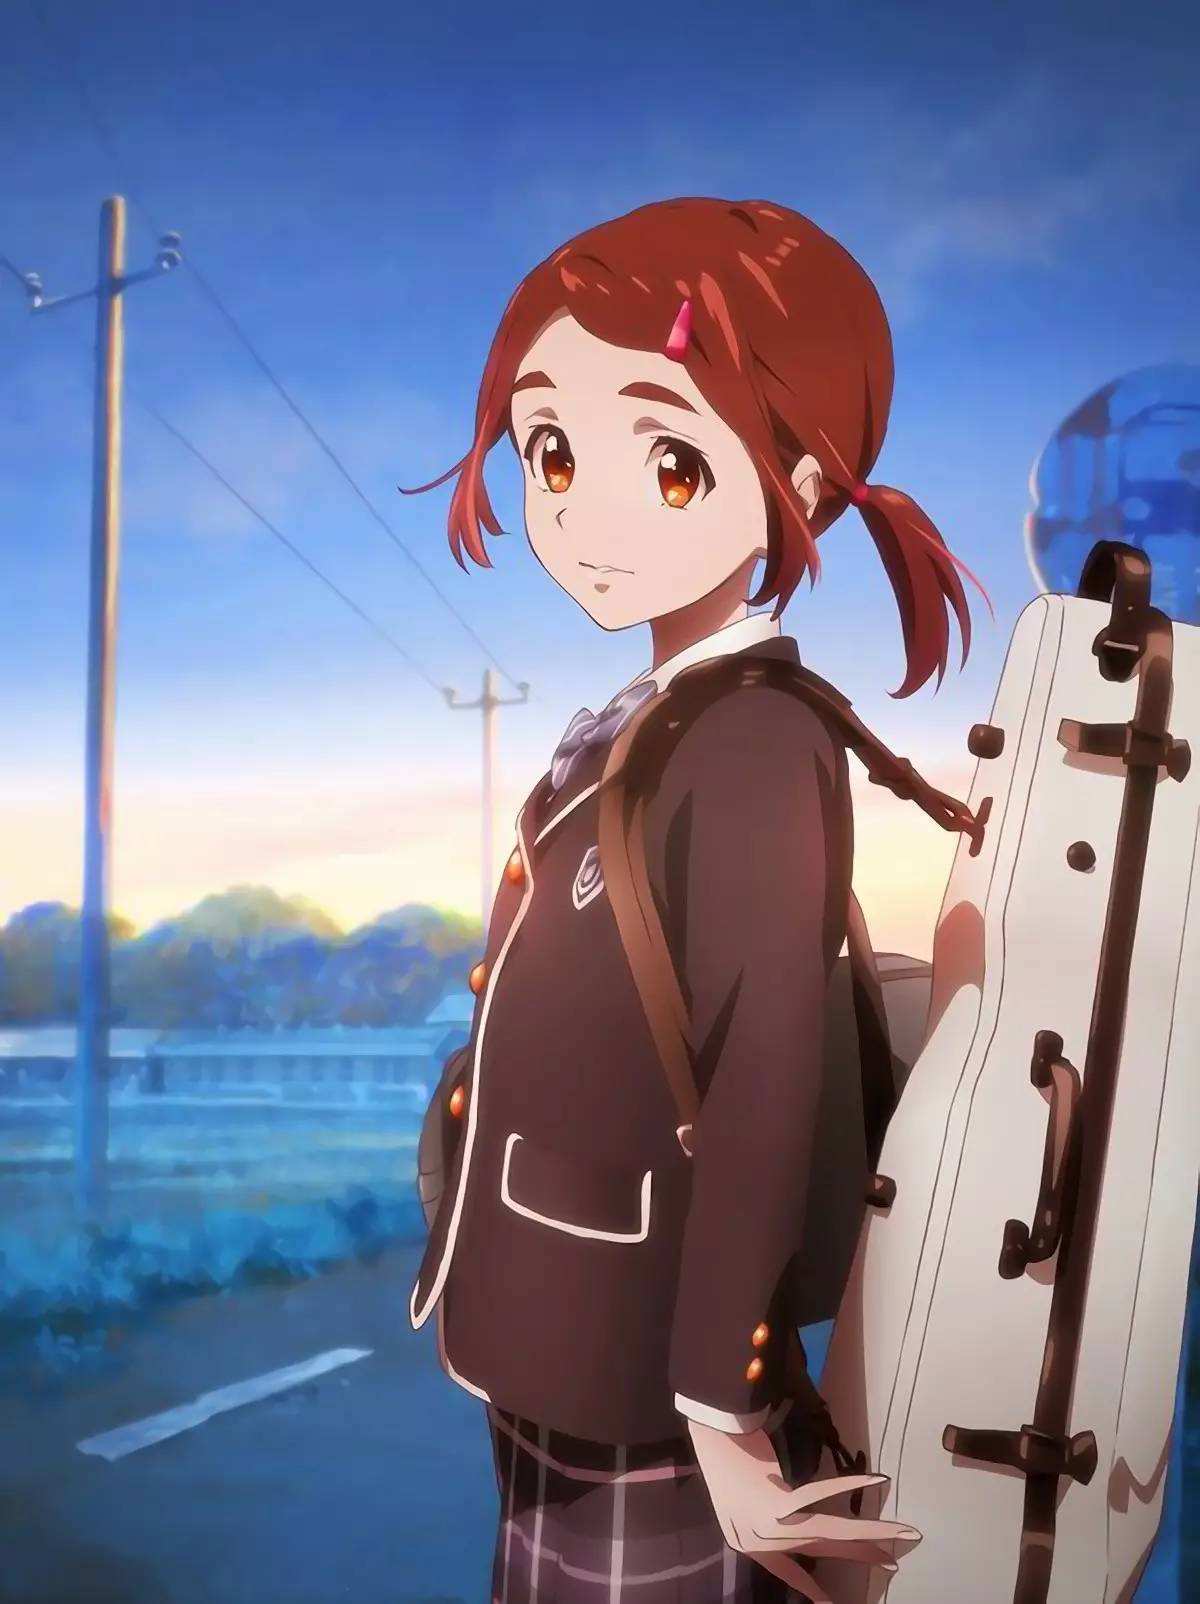 Additional cast for the anime film âHakuboâ (Twilight) revealed. Itâll have a premiere screening in Fukushima on May 24th. -Synopsis-ââHakubo follows youths living in âthe now and presentâ in Iwaki, Fukushima Prefecture after the Tohoku earthquake...